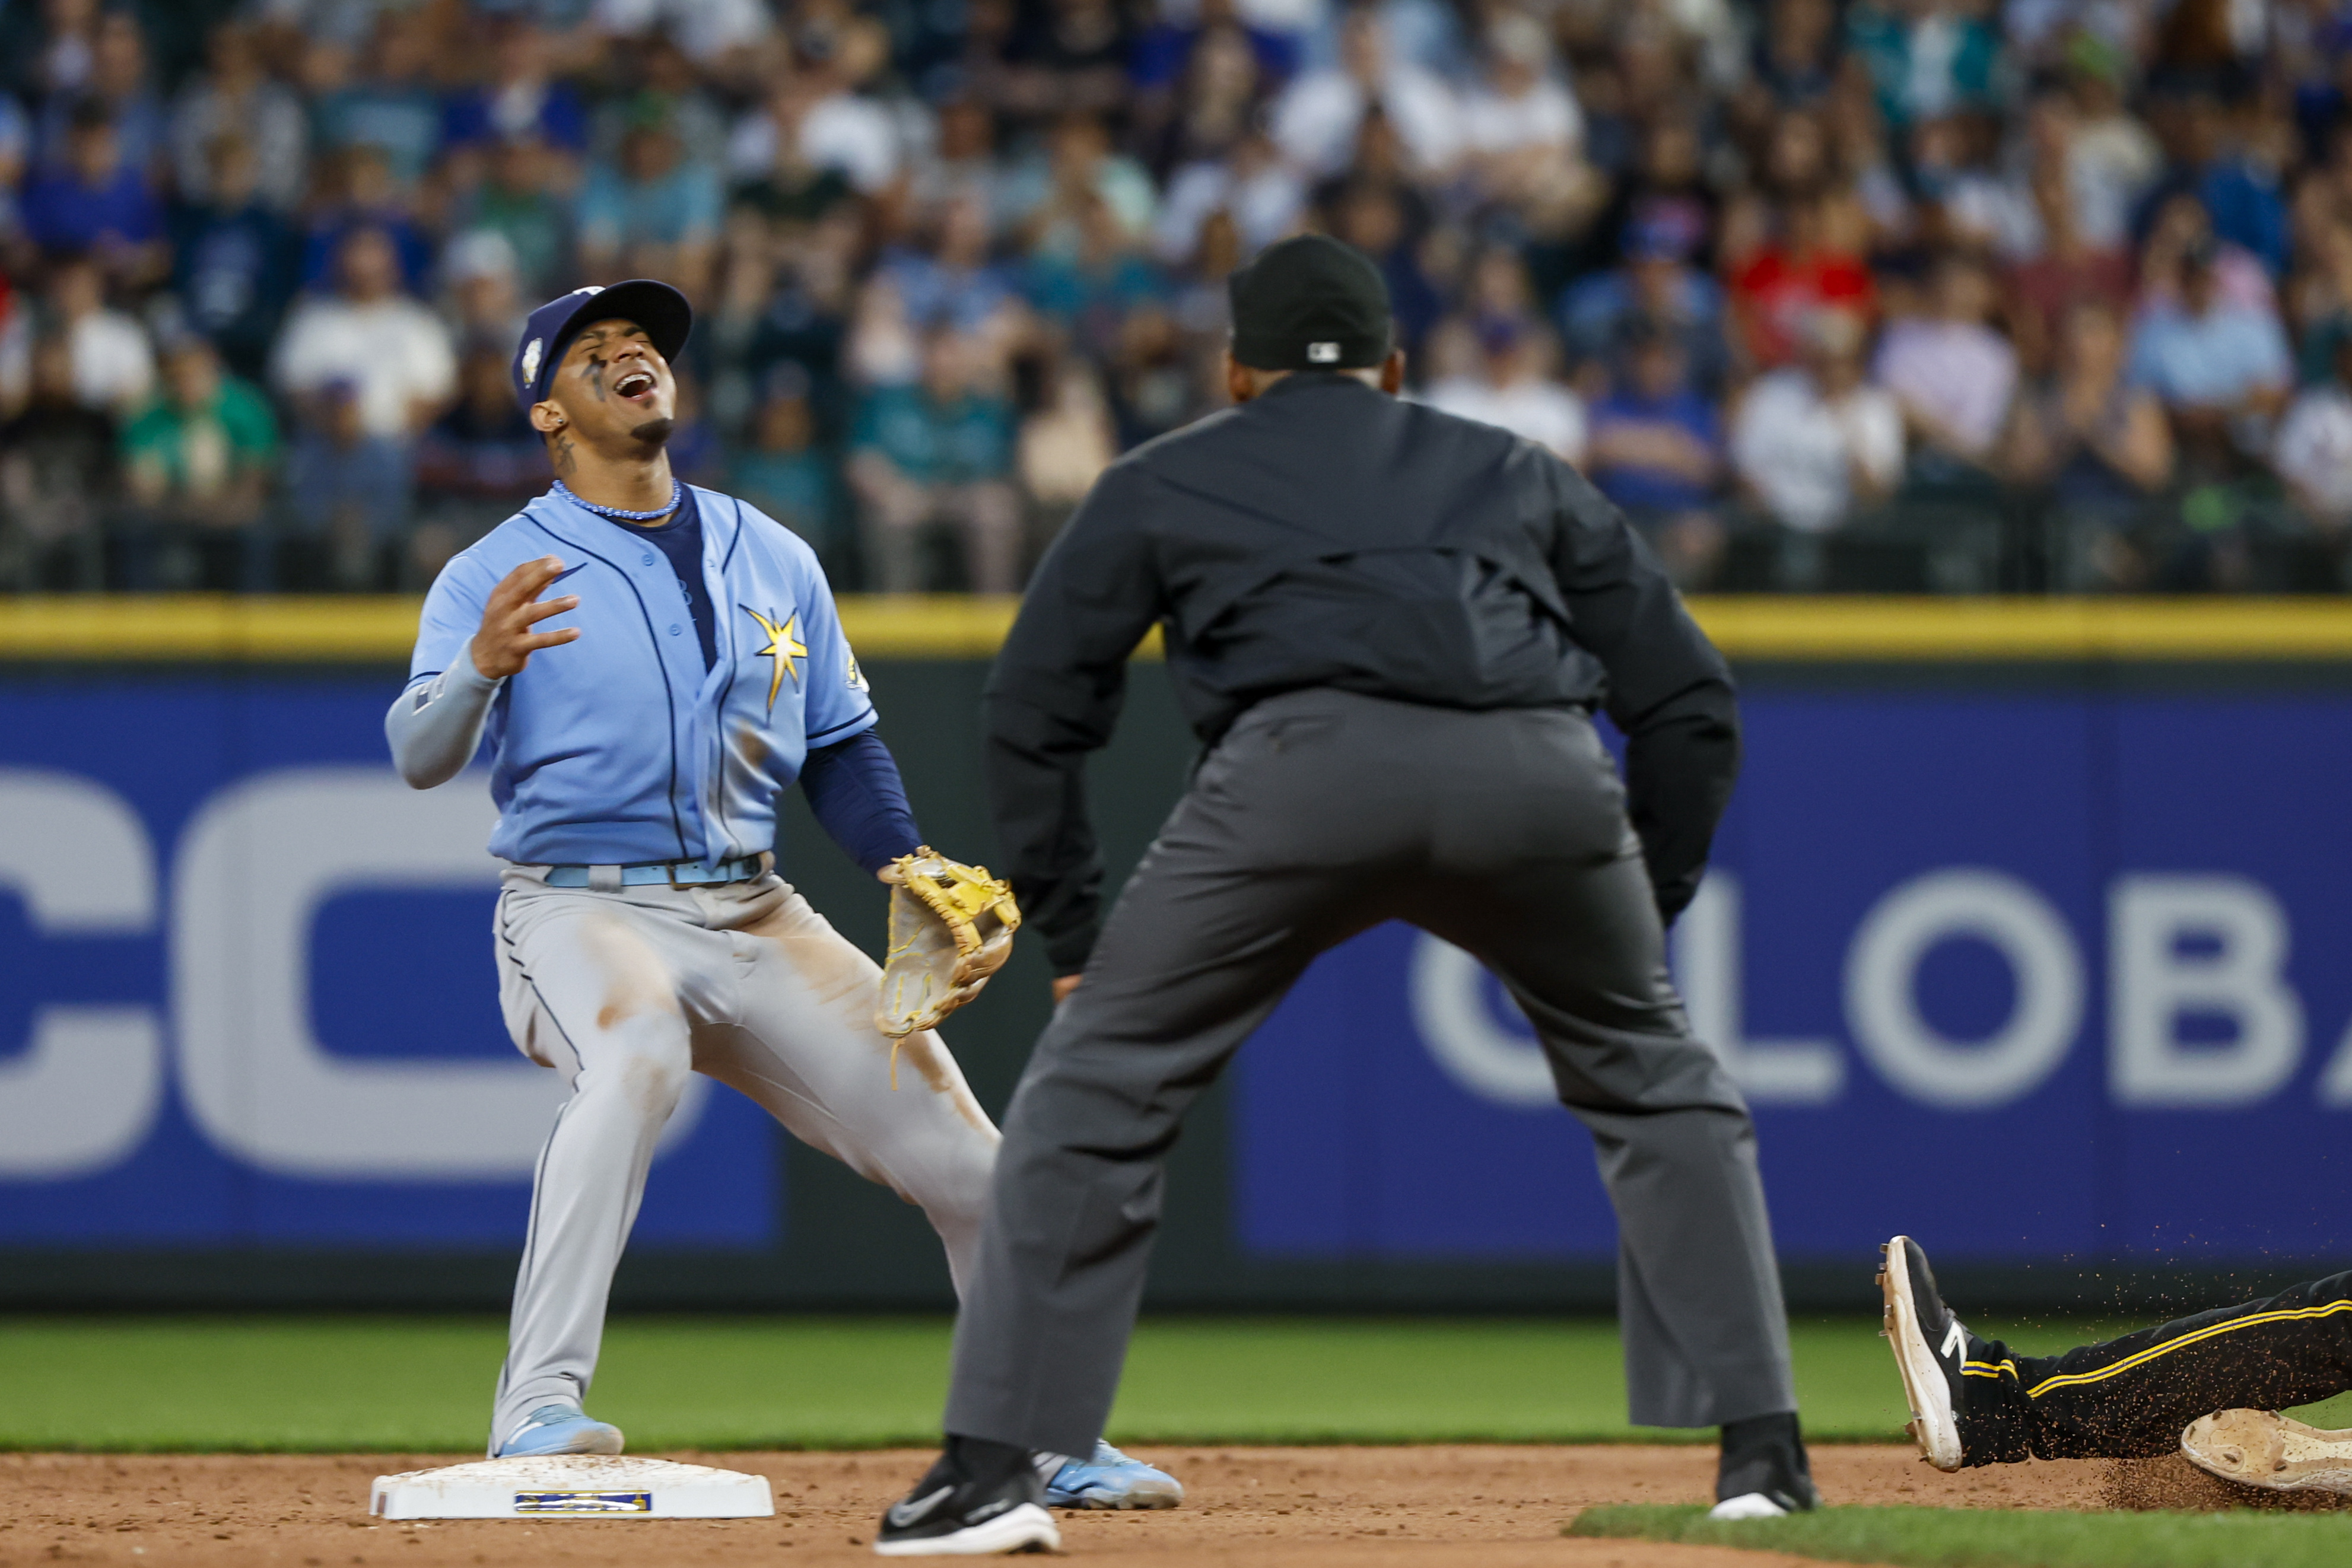 Down by 4 early, Rays roll to 15-4 win over Mariners